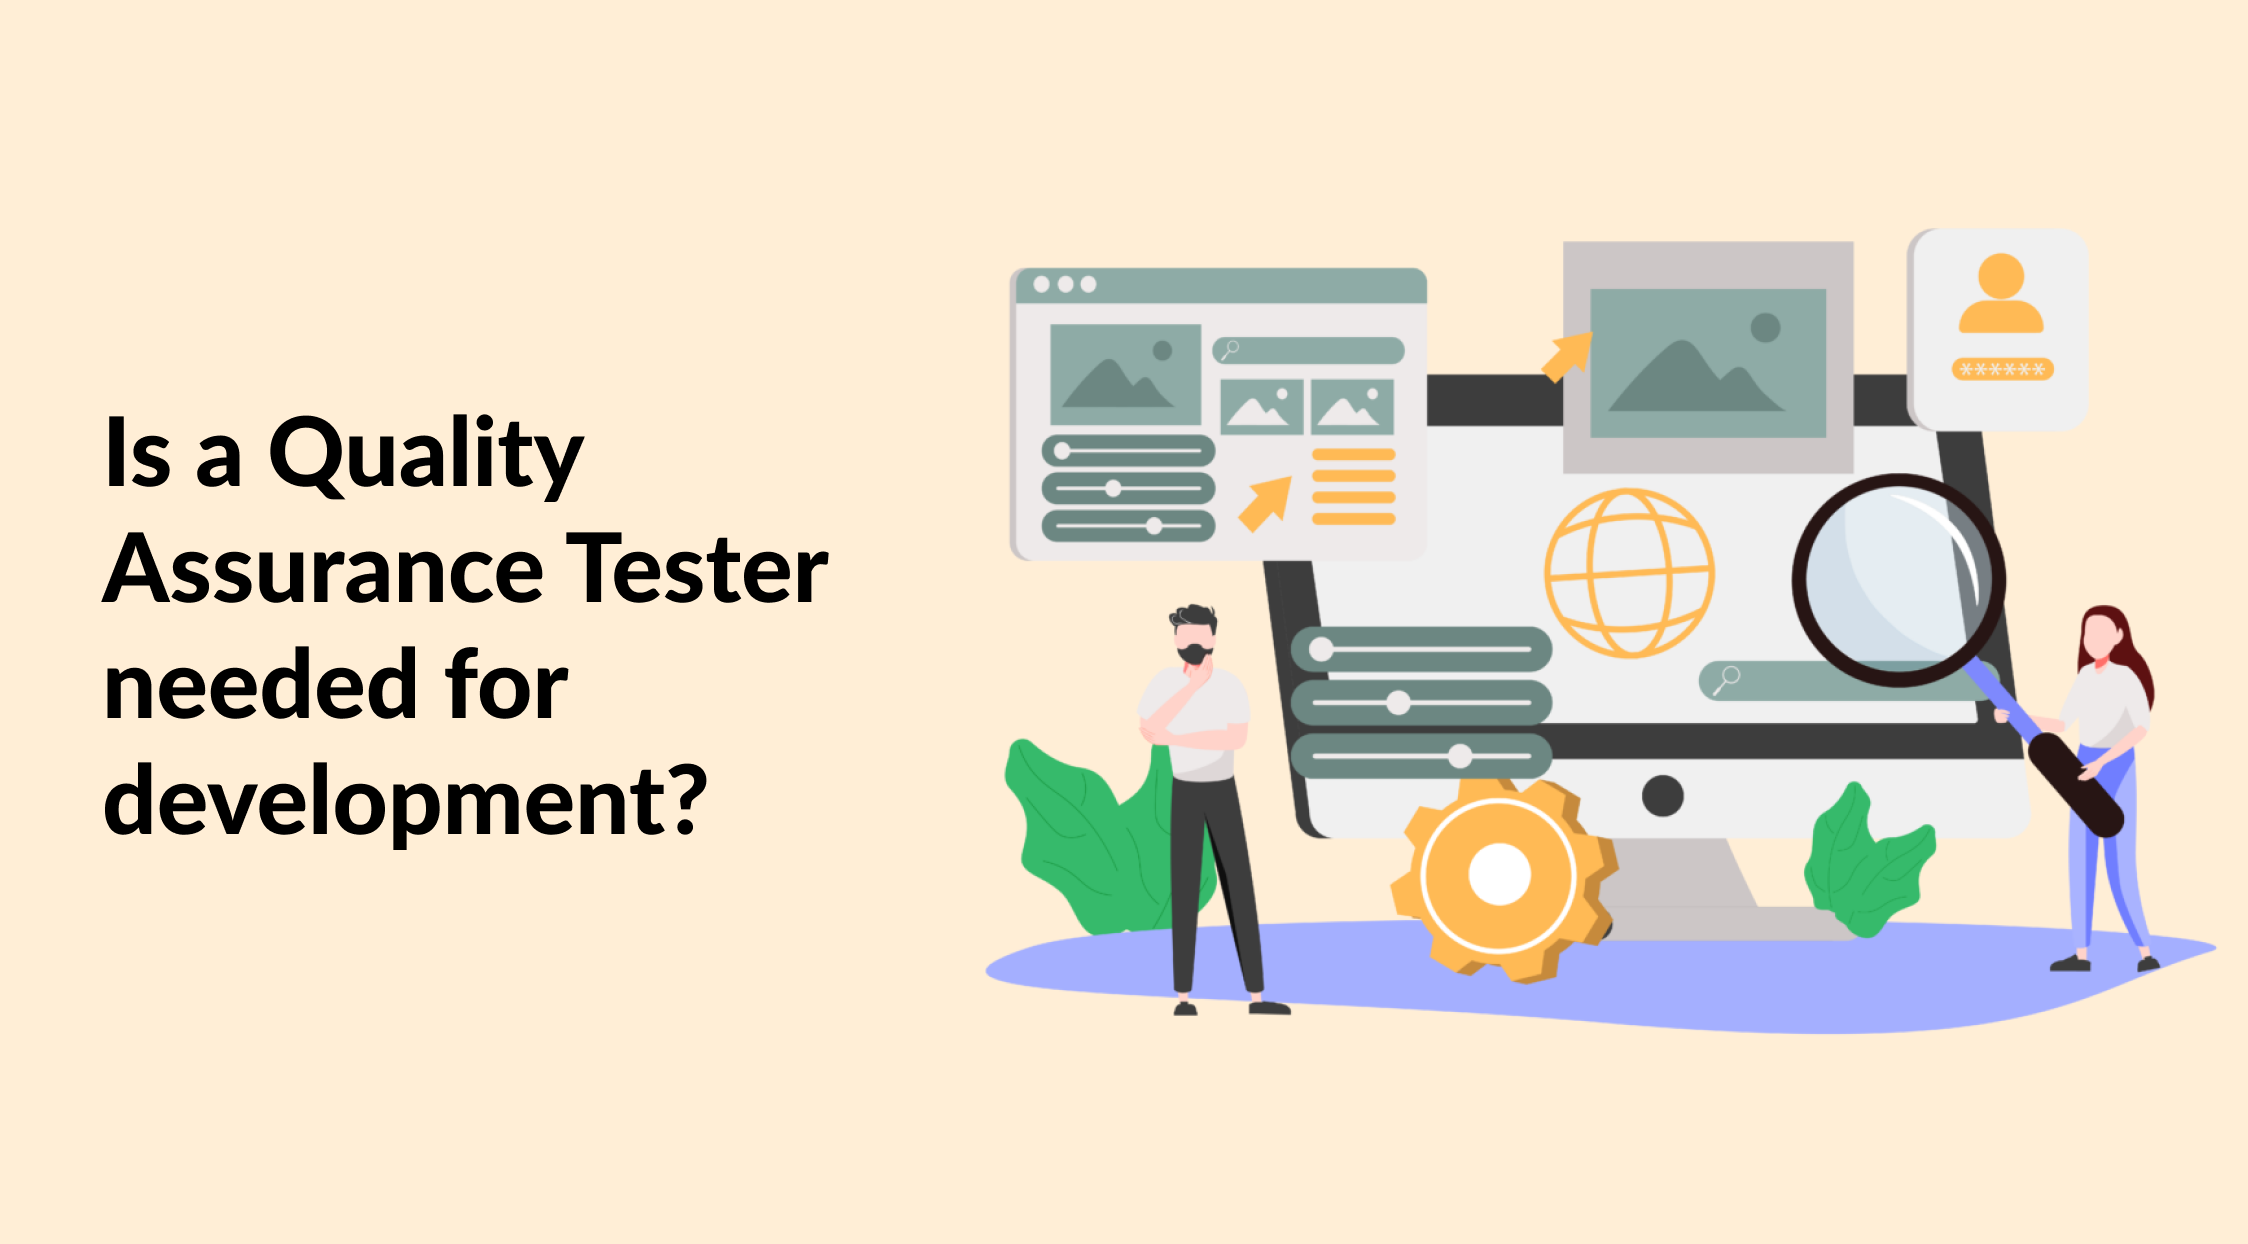 Is a Quality Assurance Tester needed for development